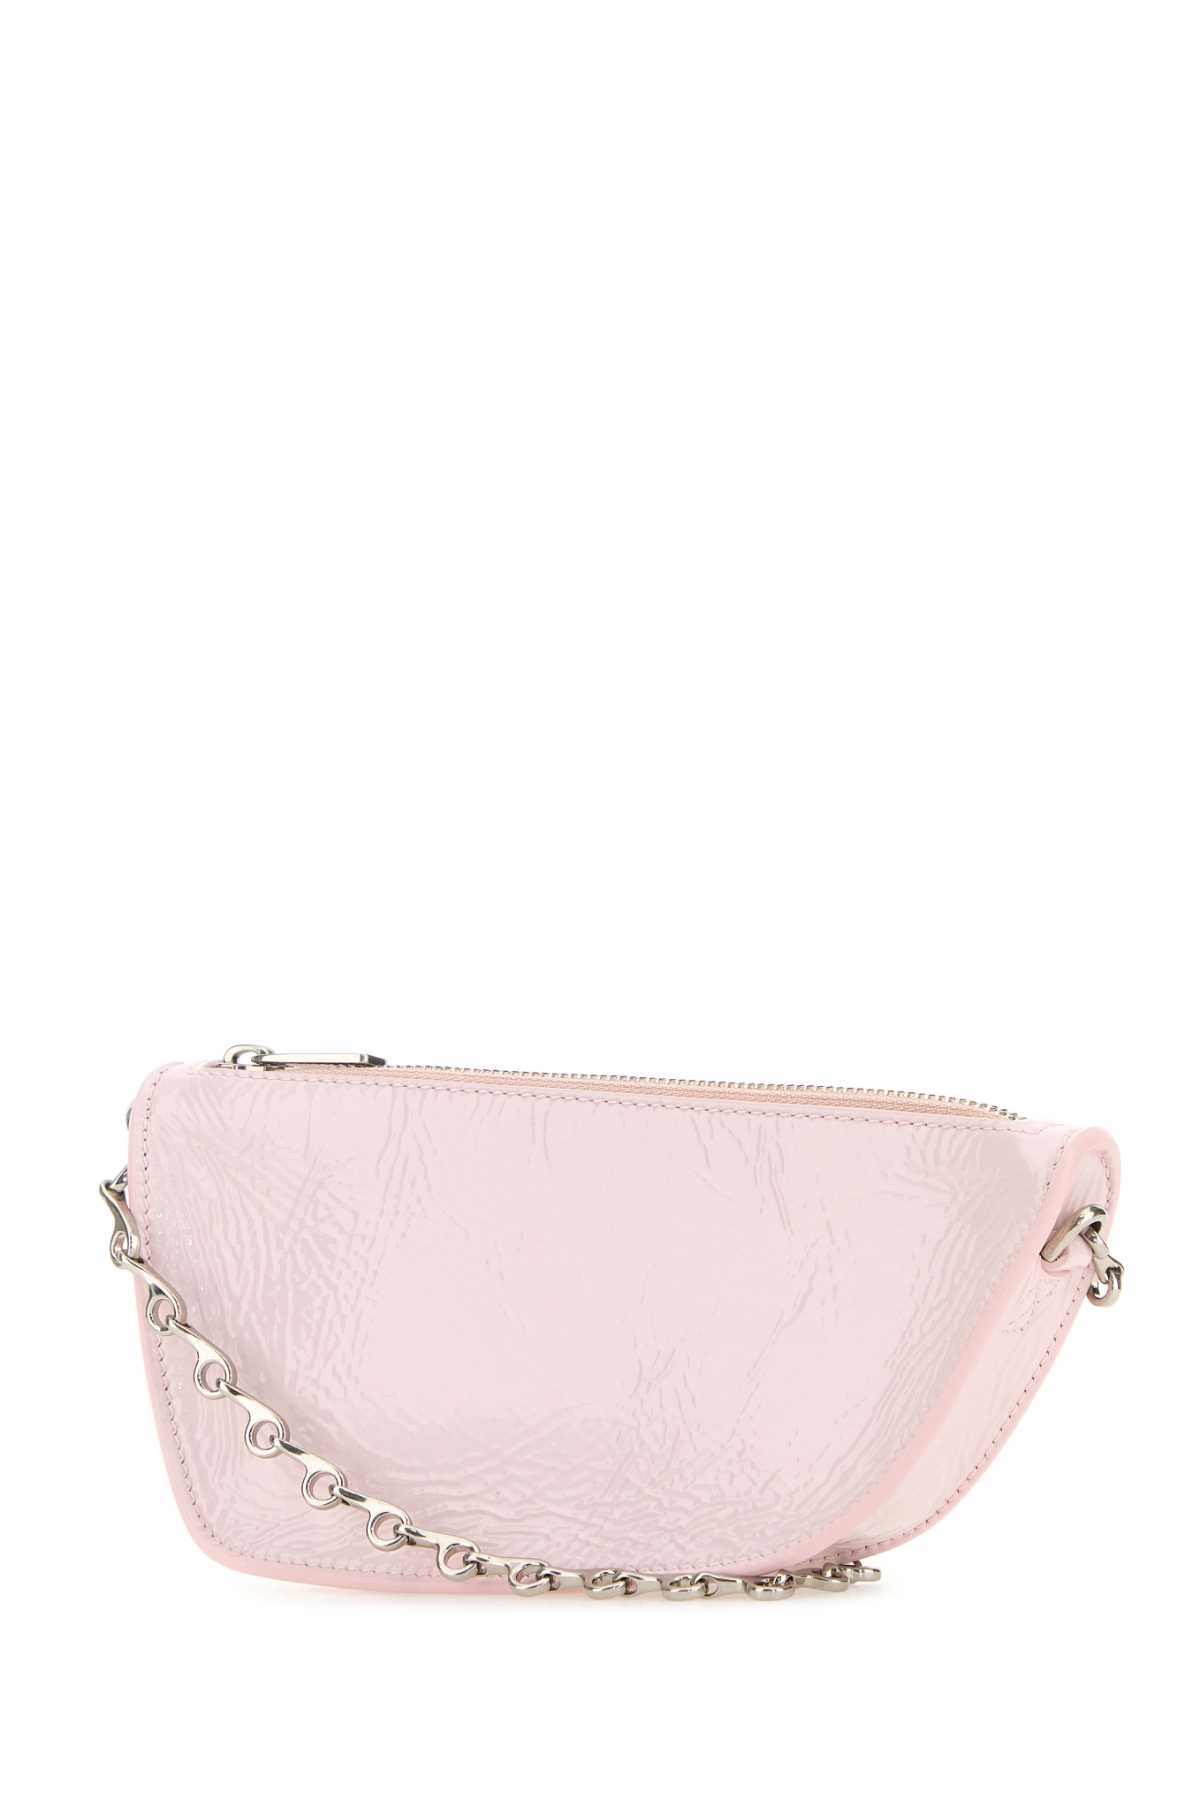 BURBERRY PASTEL PINK LEATHER MICRO SHIELD SHOULDER BAG